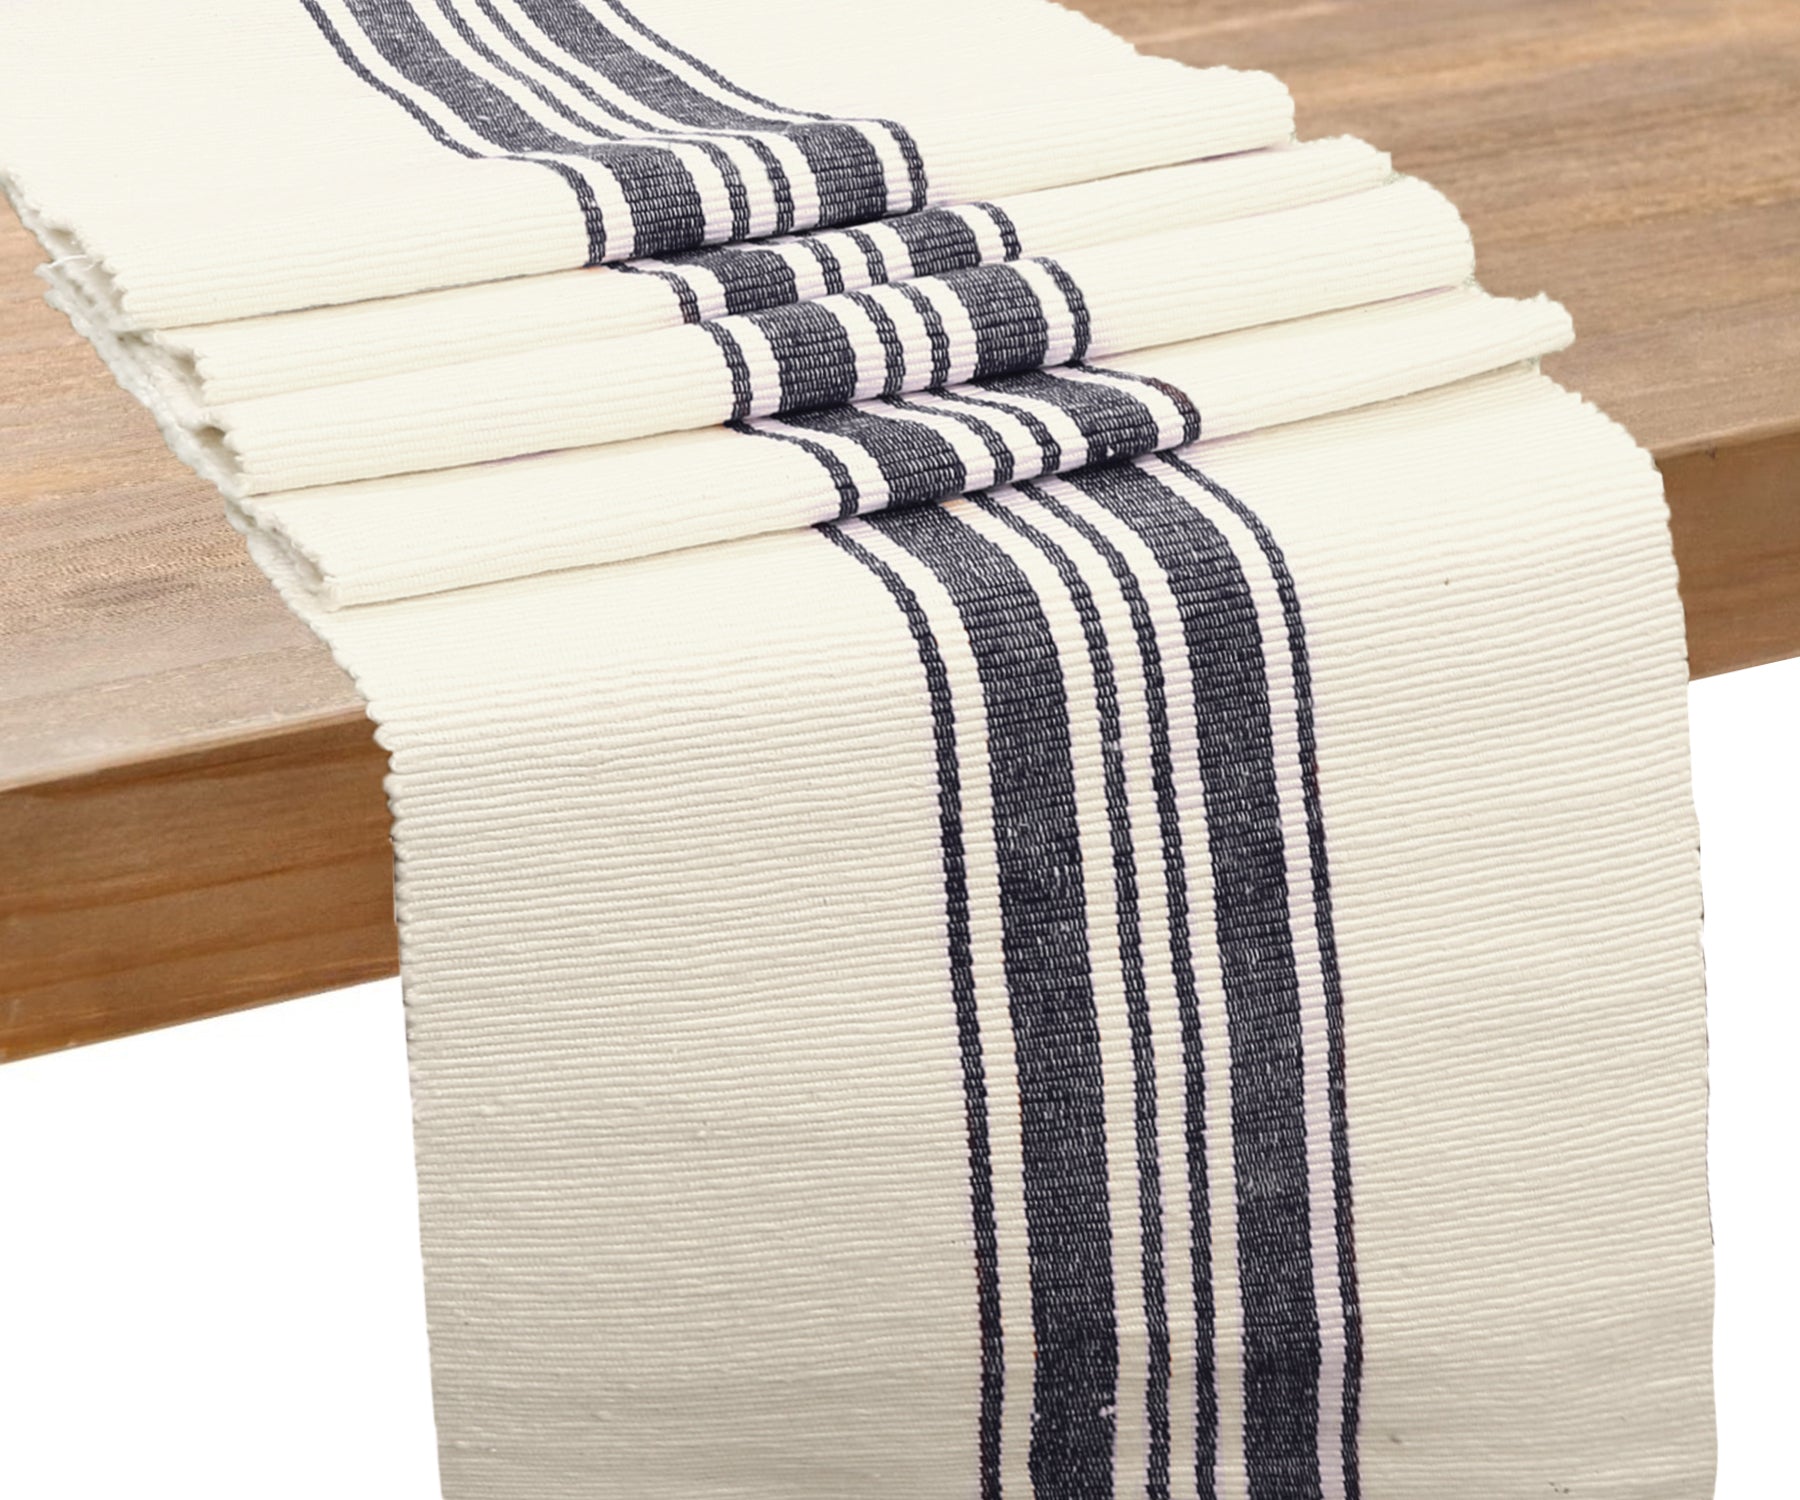 Fresh and clean look with a white striped table runner.